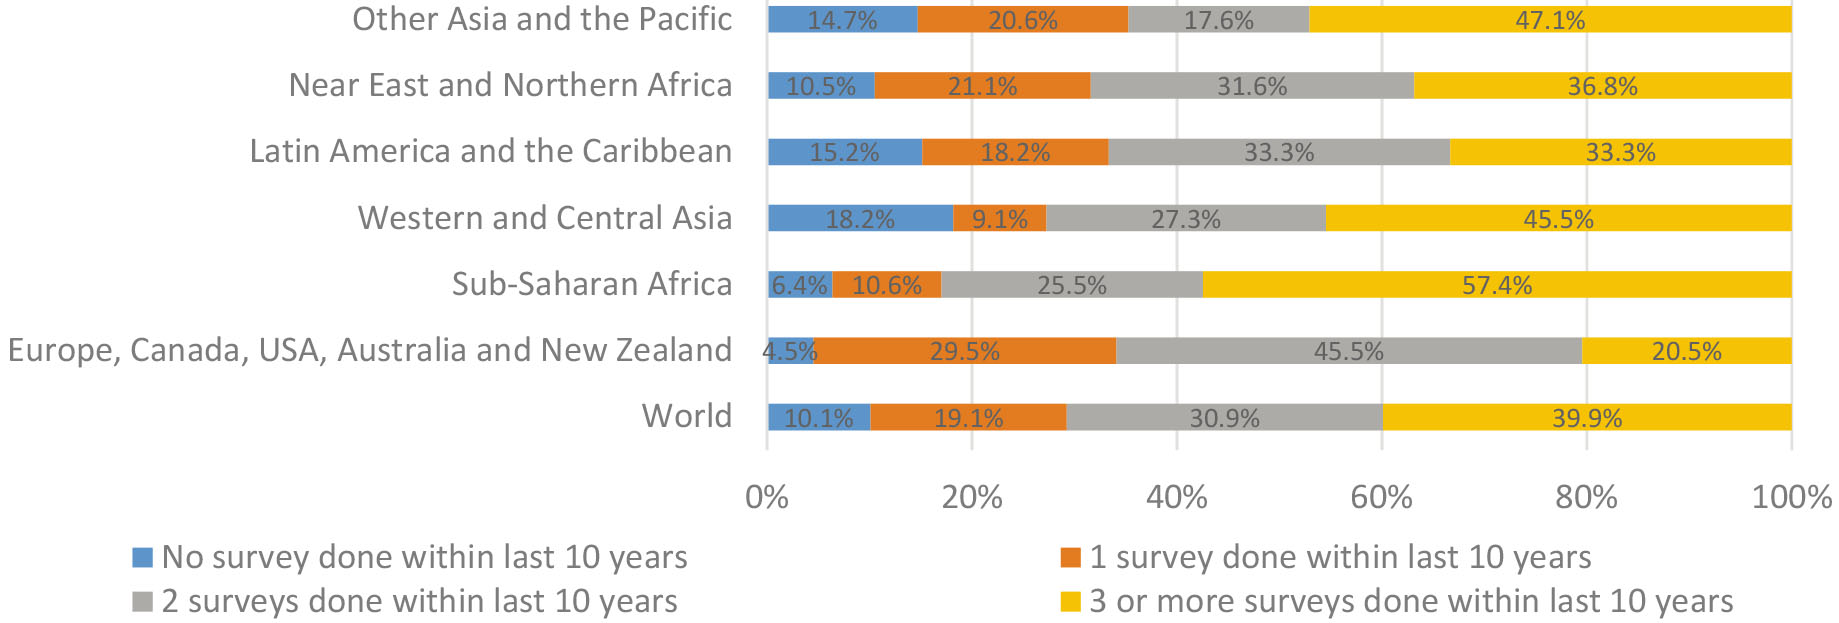 Percentage of countries according to the frequency of their household surveys on health in the last 10 years (period covering 2011–2020), per frequency and region (Source: World Bank. Statistical Performance Indicators Database, 2021).